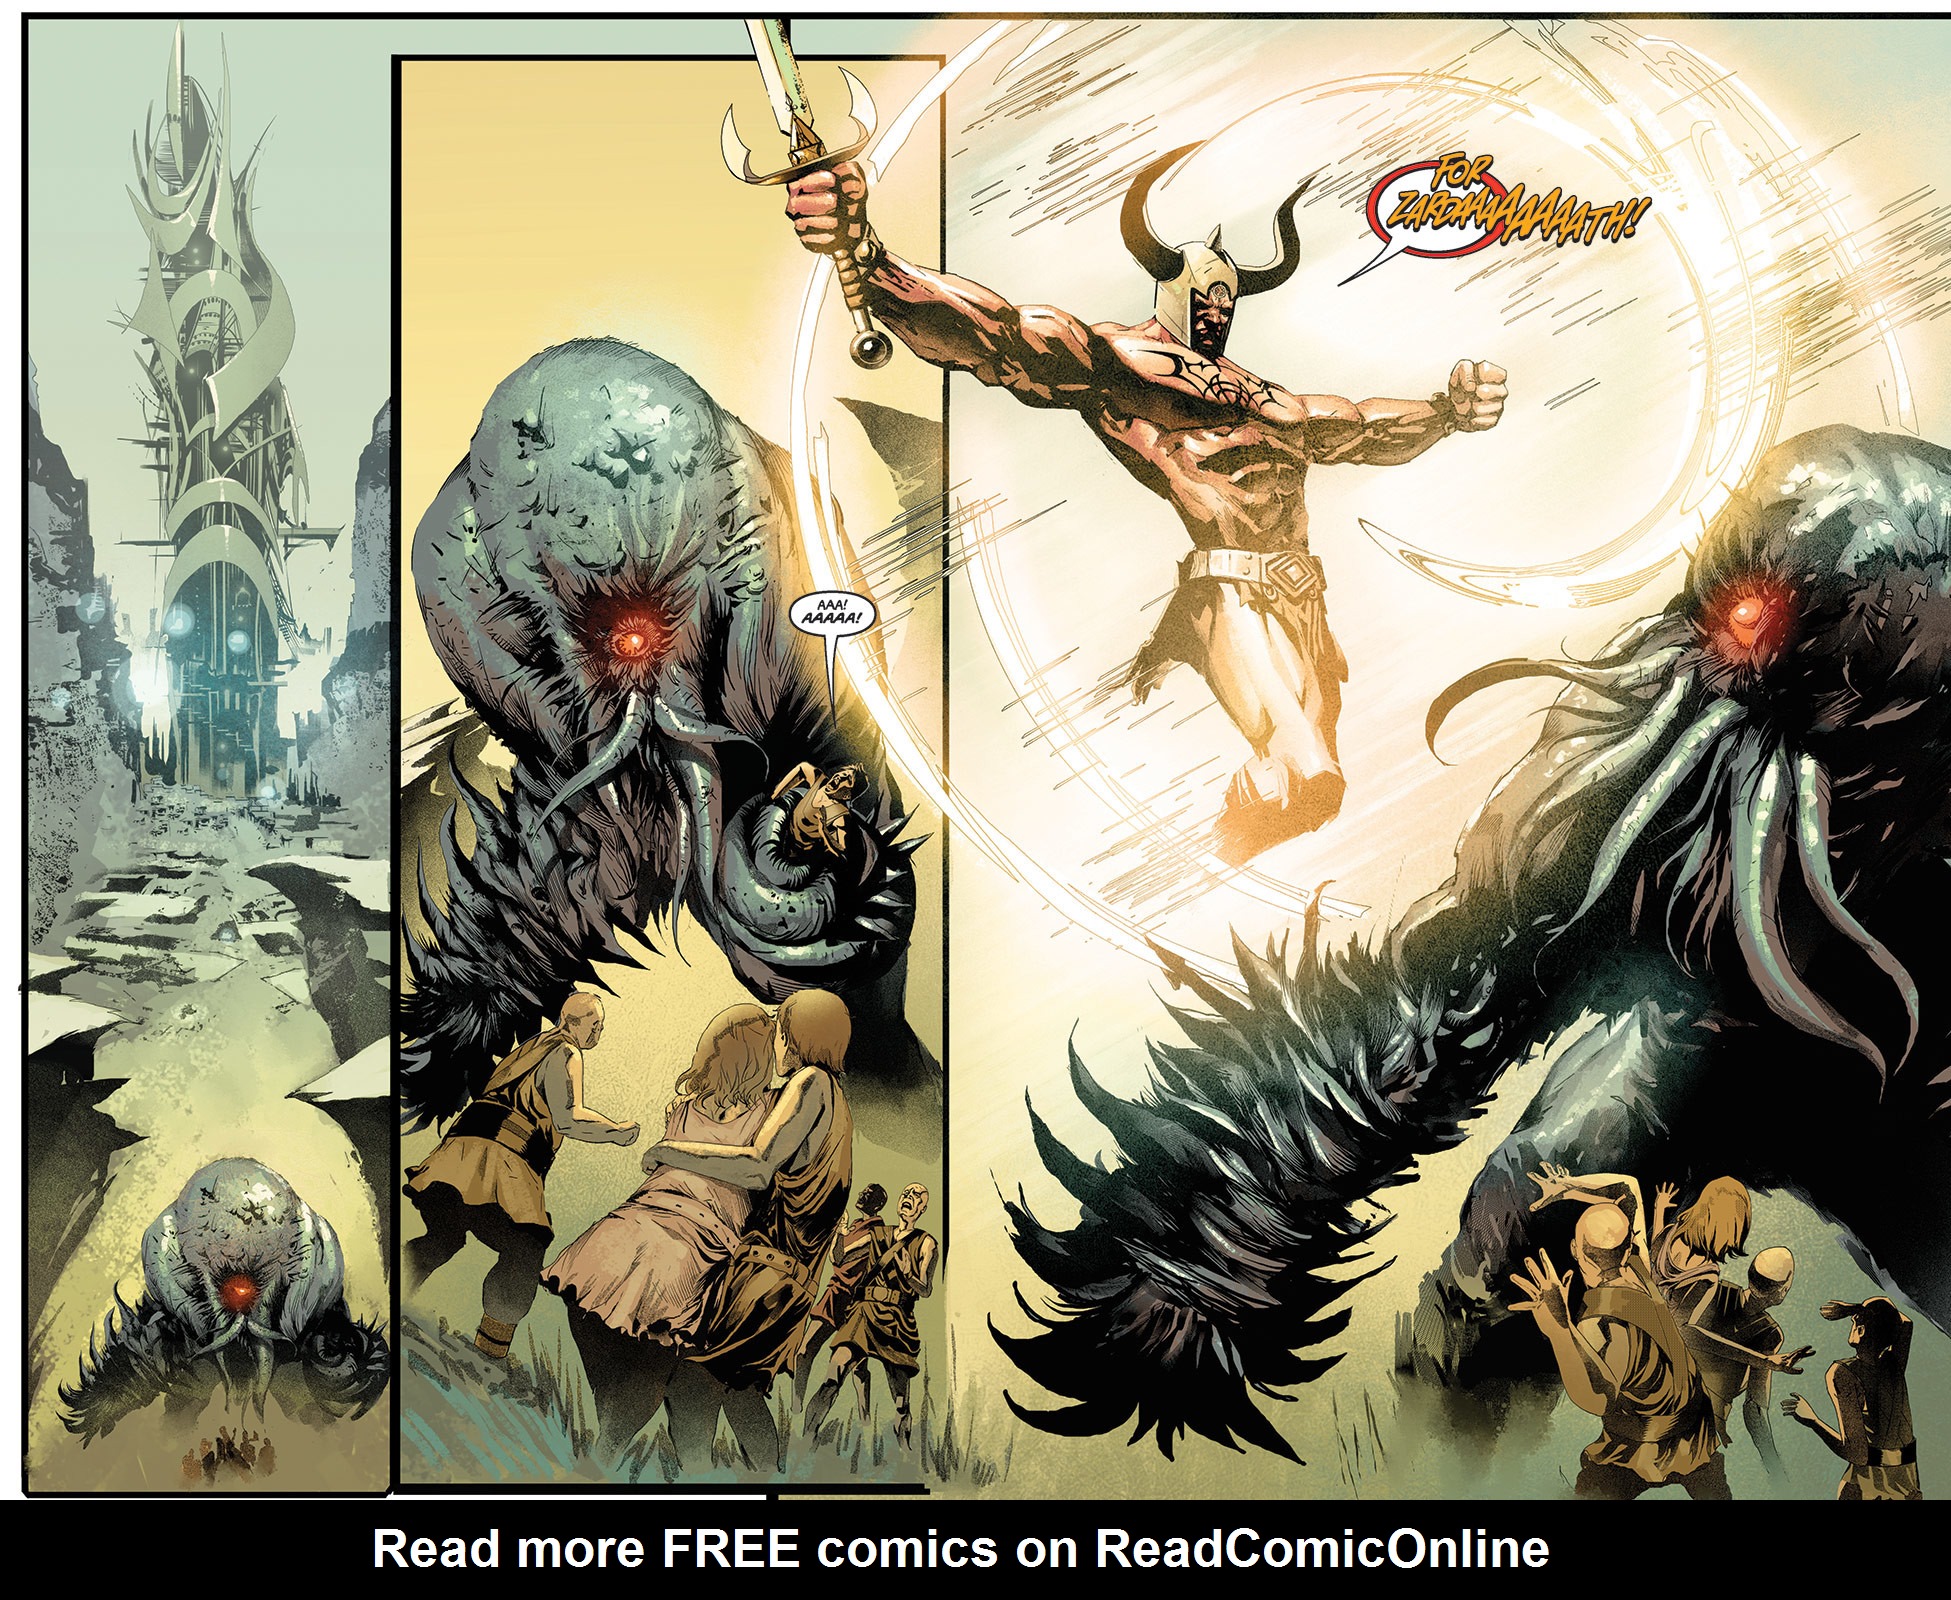 Read online Newuniversal: Conqueror comic -  Issue # Full - 5